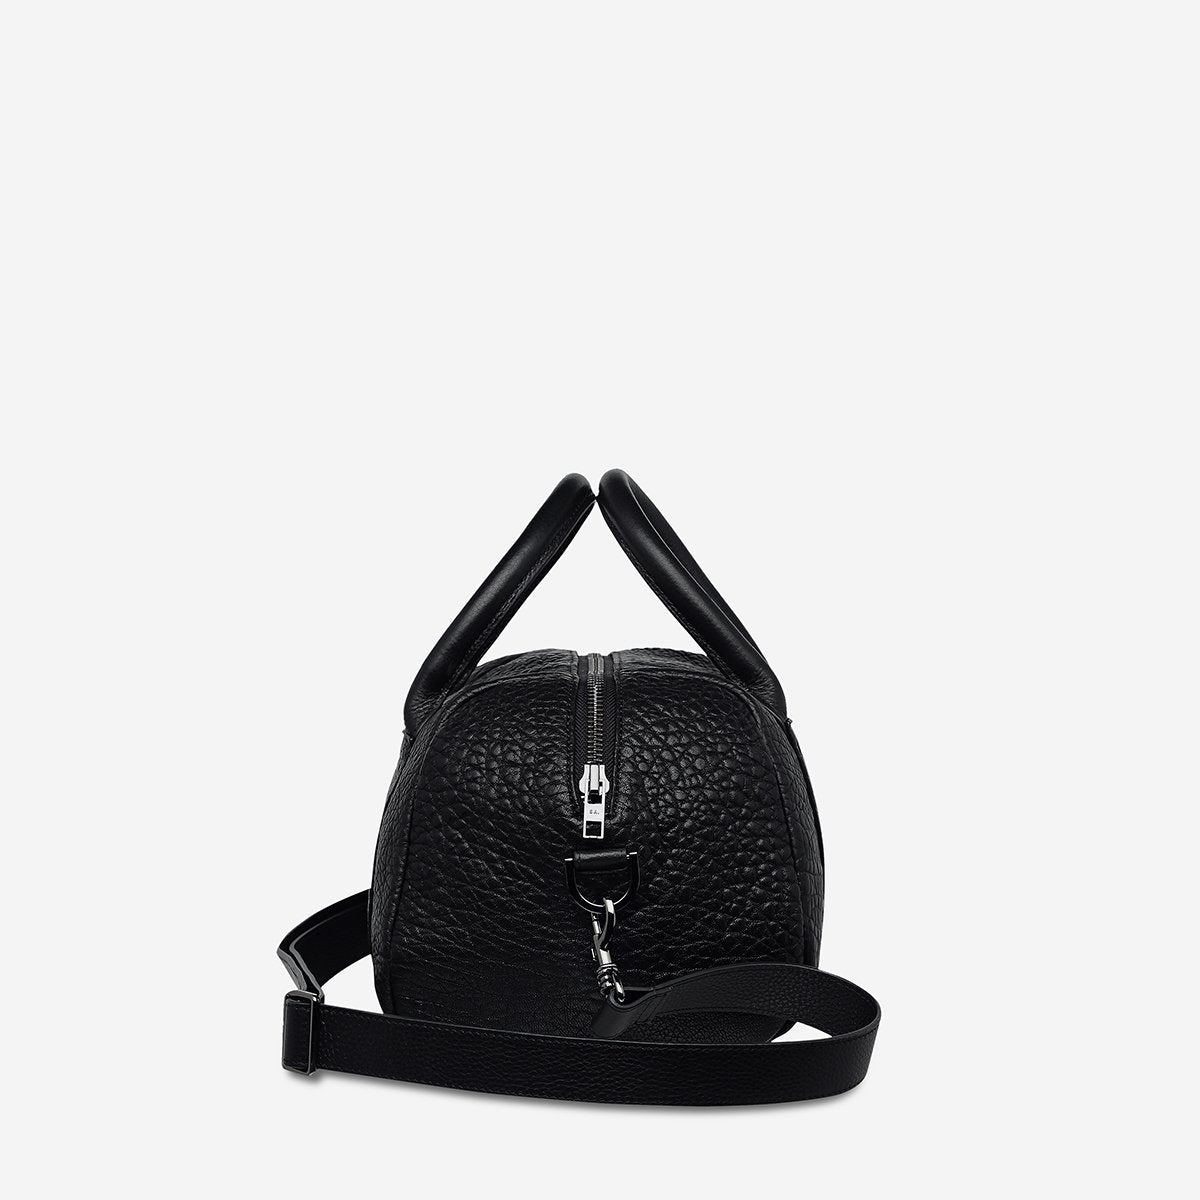 Status Anxiety bag - As She Pleases - Black Bubble